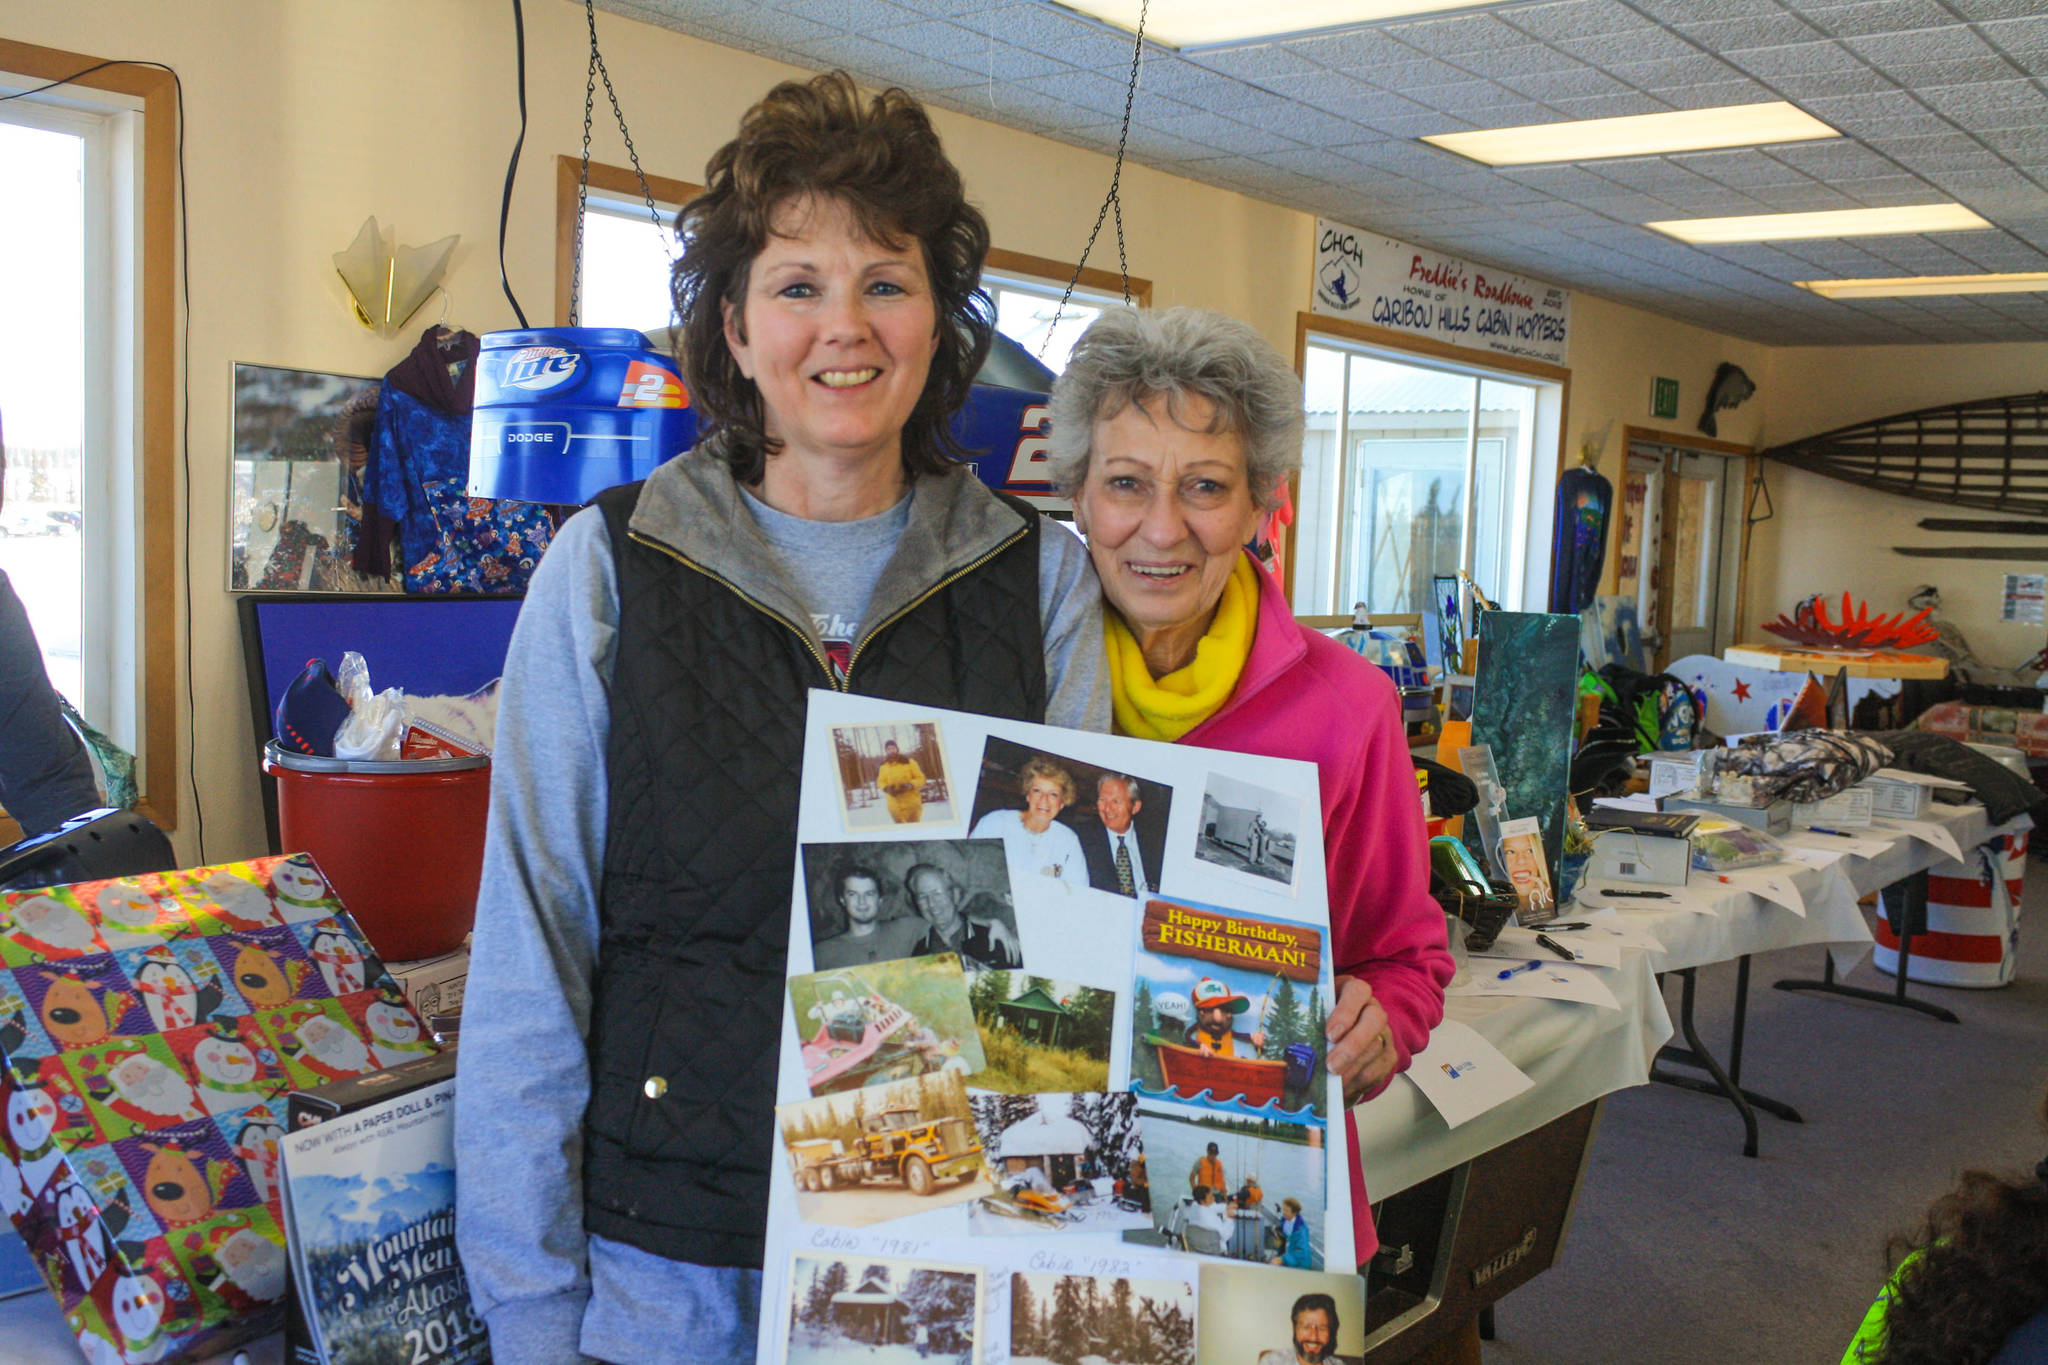 Nancy Myers, left, and her mother Betty Harris share family photos memorializing family patriarch Jim Harris, who died of cancer in 2017 on Saturday, Feb. 24, 2018 near Ninilchik, Alaska. Jim Harris was honored at this year’s WOW event. (Photo by Erin Thompson/Peninsula Clarion)